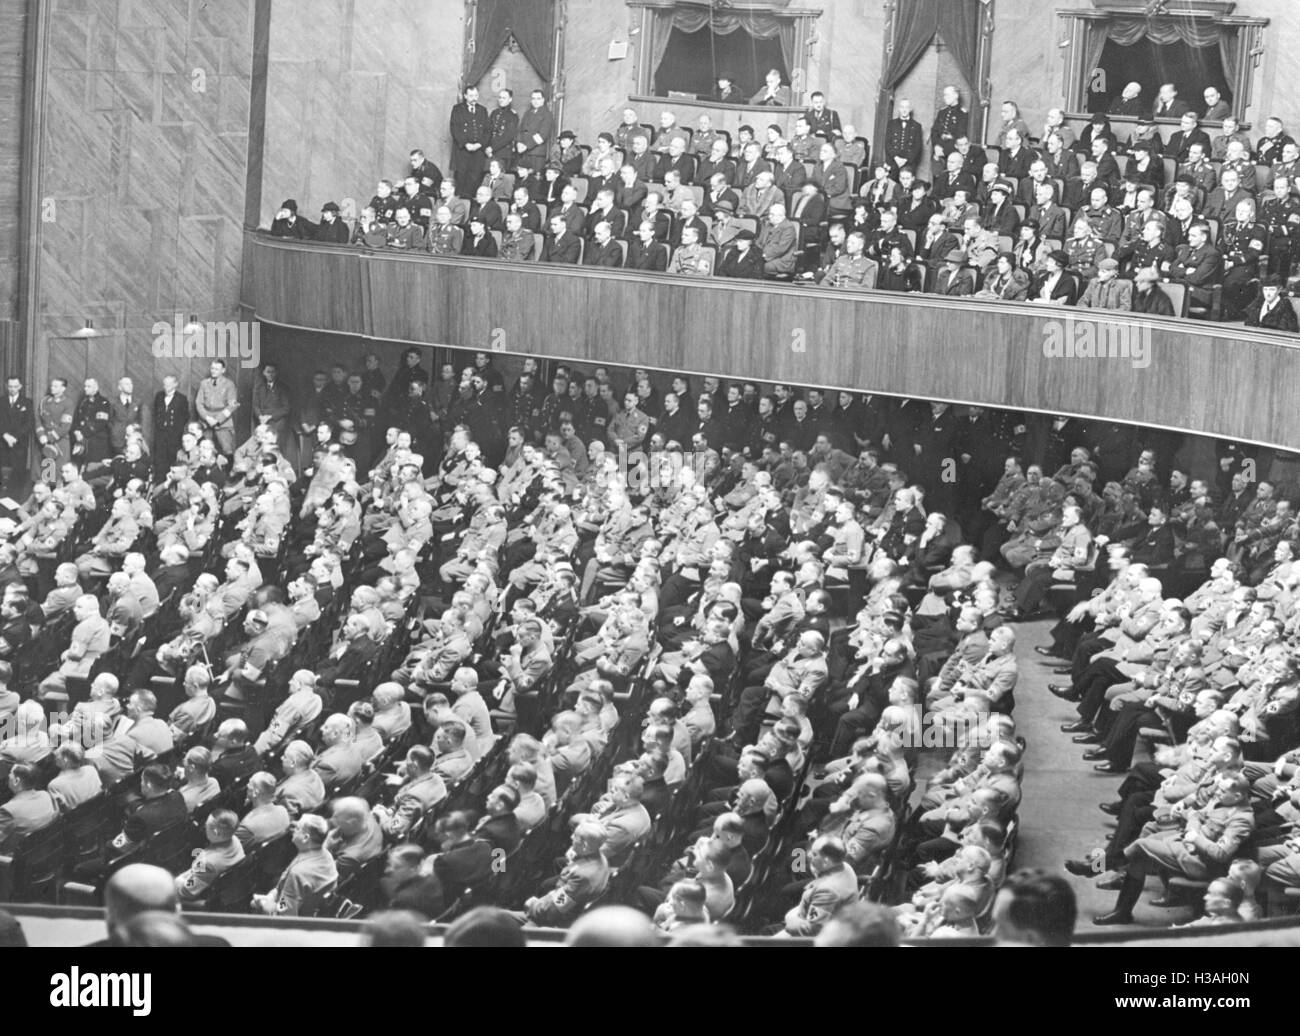 Plenary session of the Reichstag in the Berlin Kroll Opera House, 1936 Stock Photo